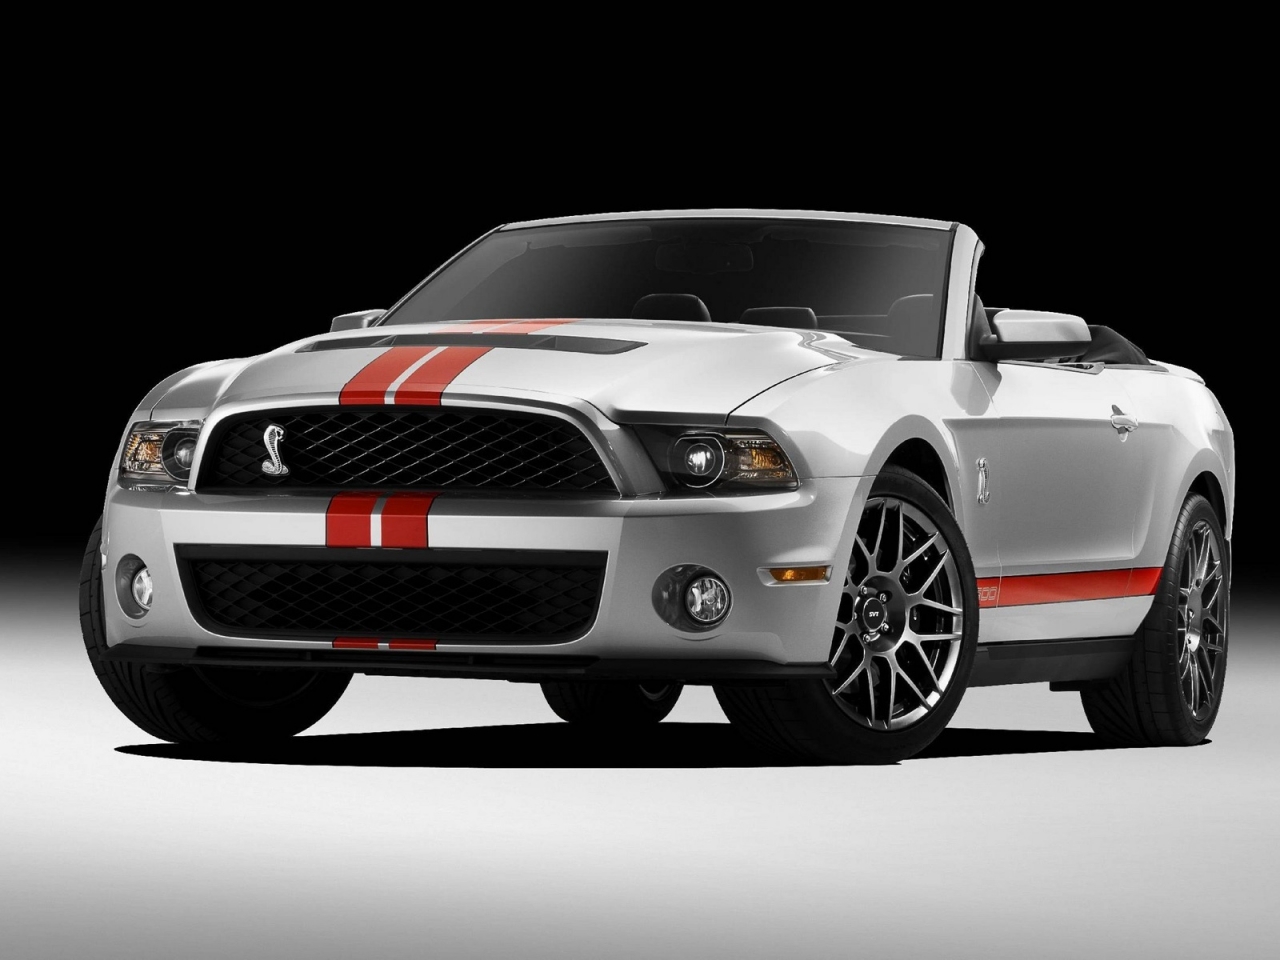 Ford Shelby GT500 Convertible 2010 for 1280 x 960 resolution